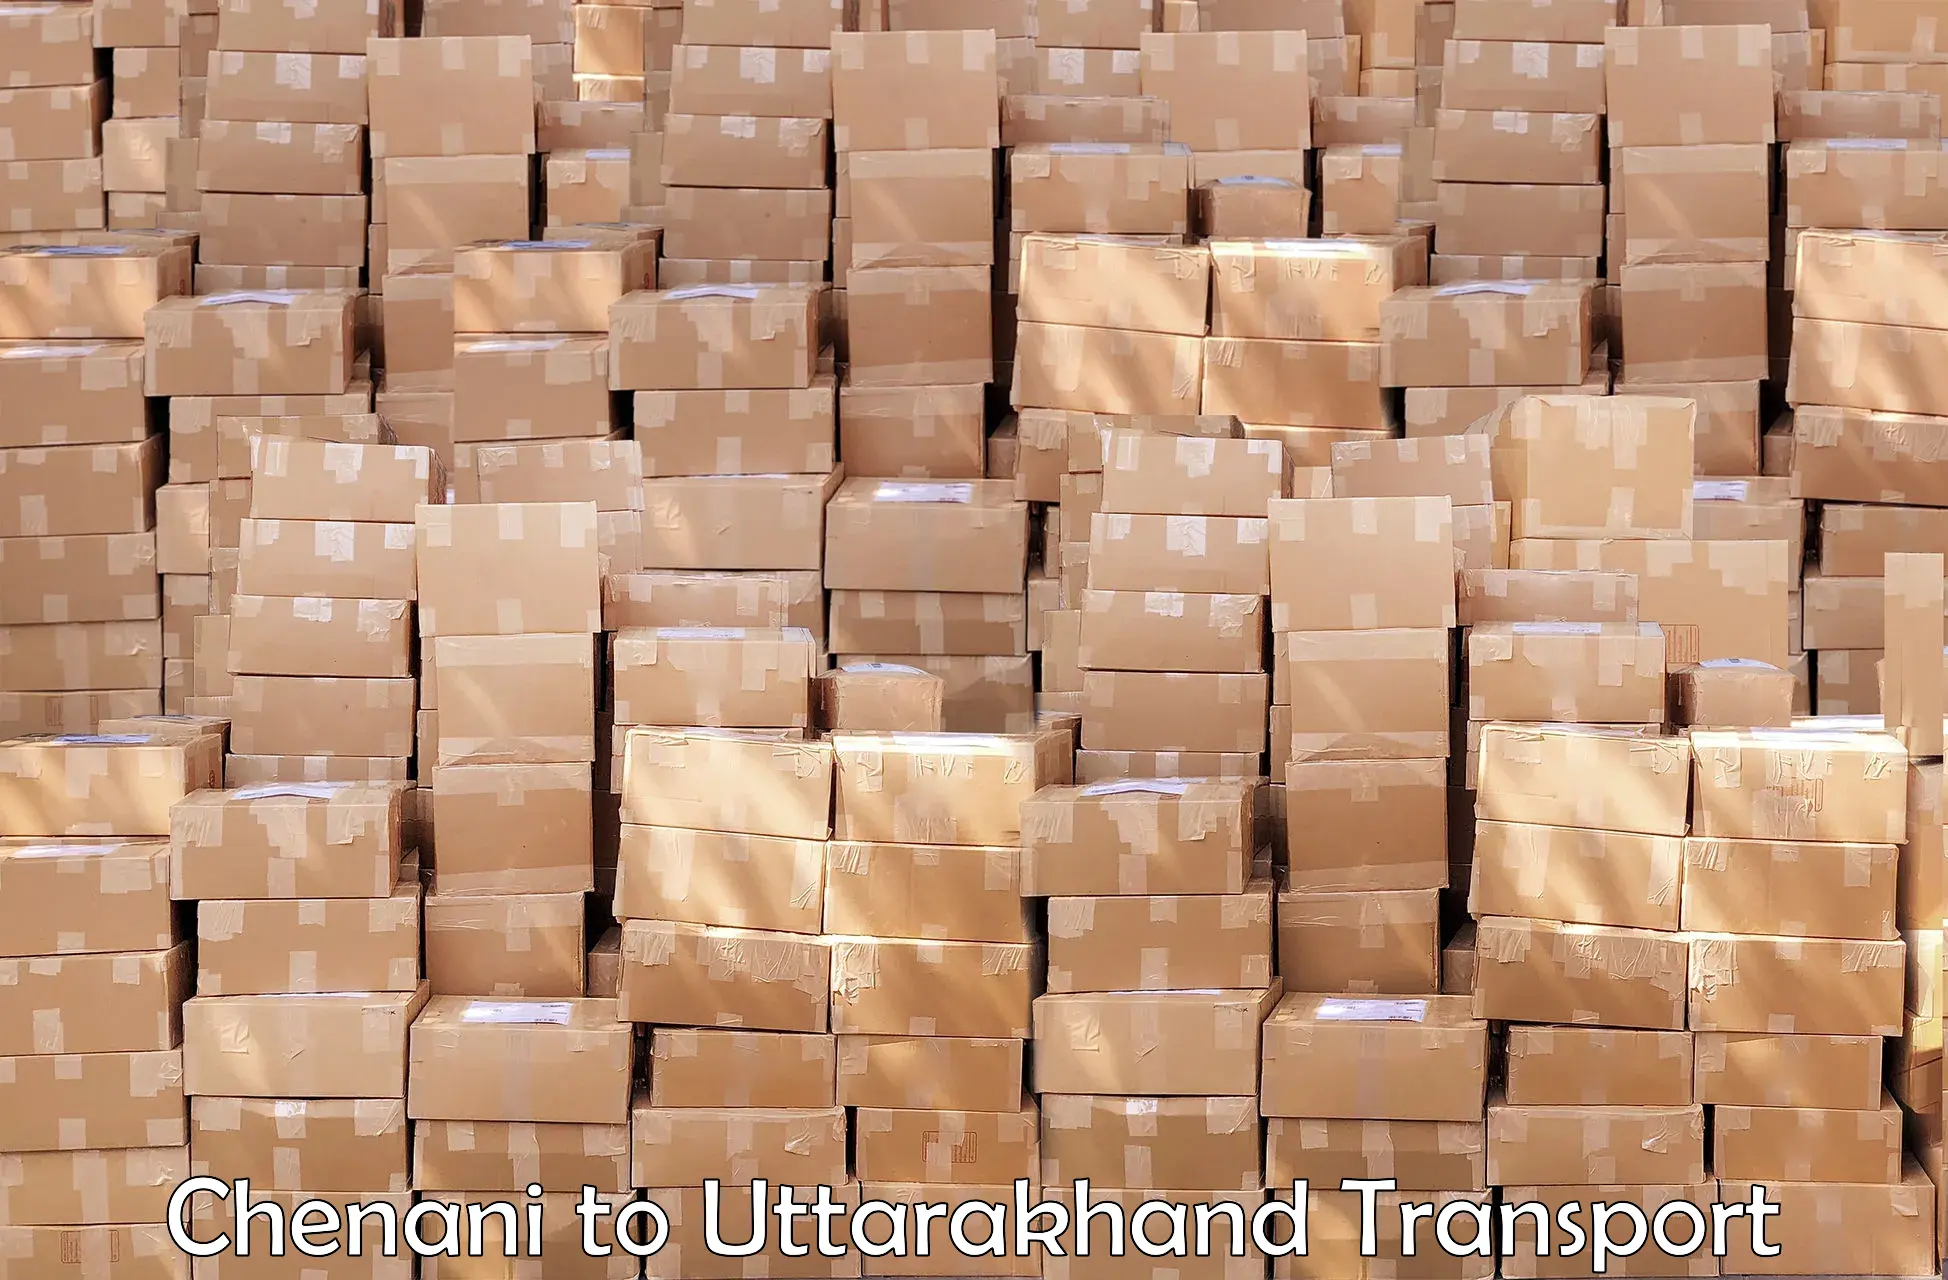 Truck transport companies in India Chenani to Rudrapur